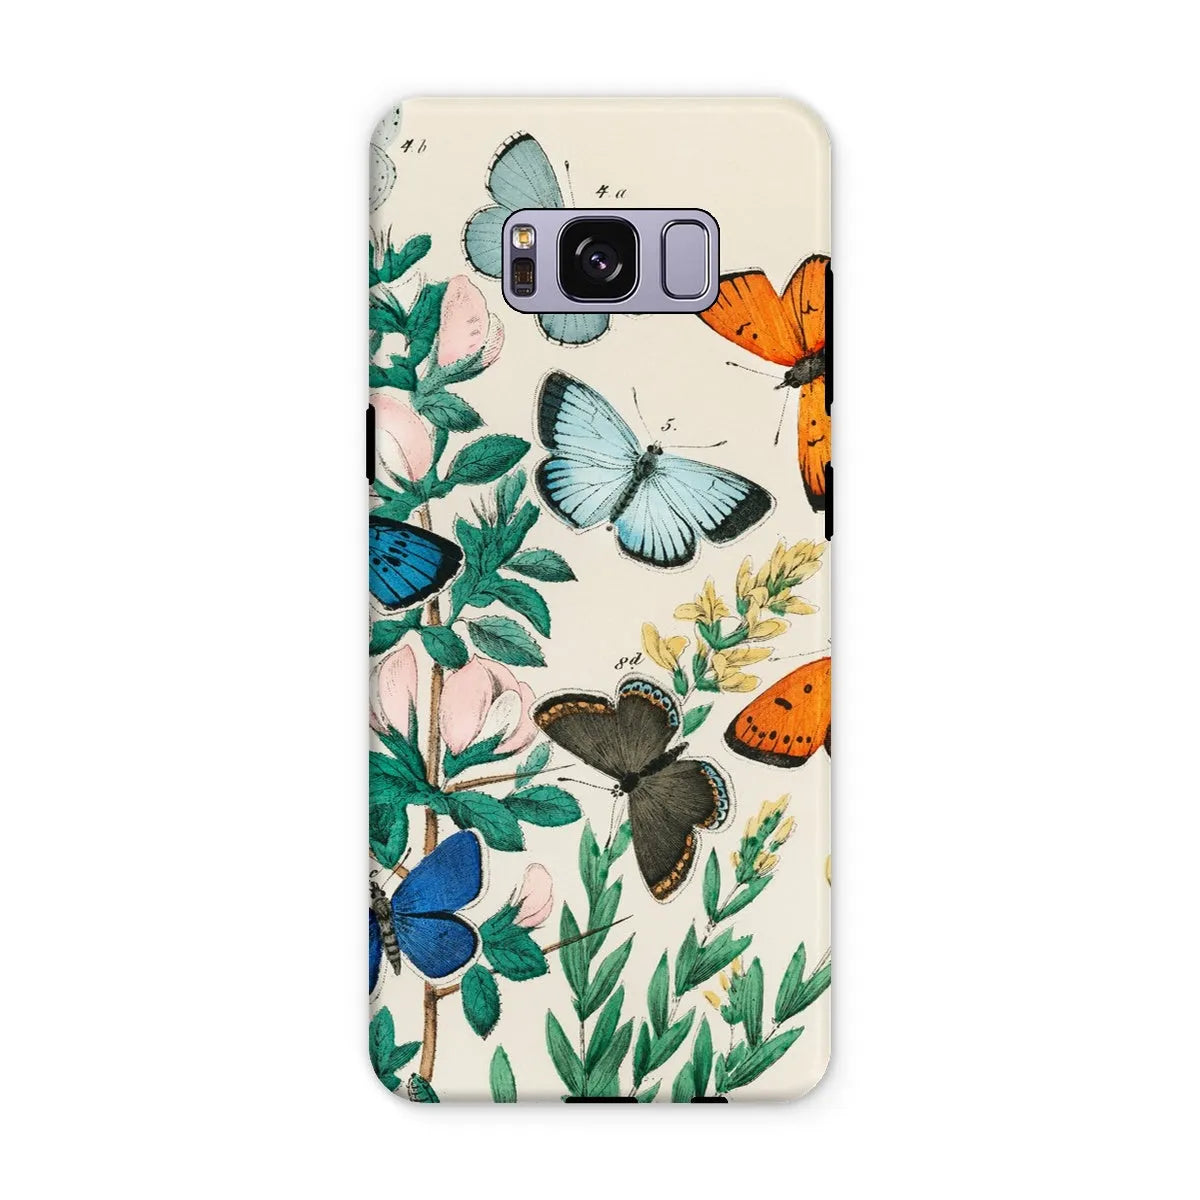 Another Butterfly Aesthetic Art Phone Case - William Forsell Kirby - Samsung Galaxy S8 Plus / Matte - Mobile Phone